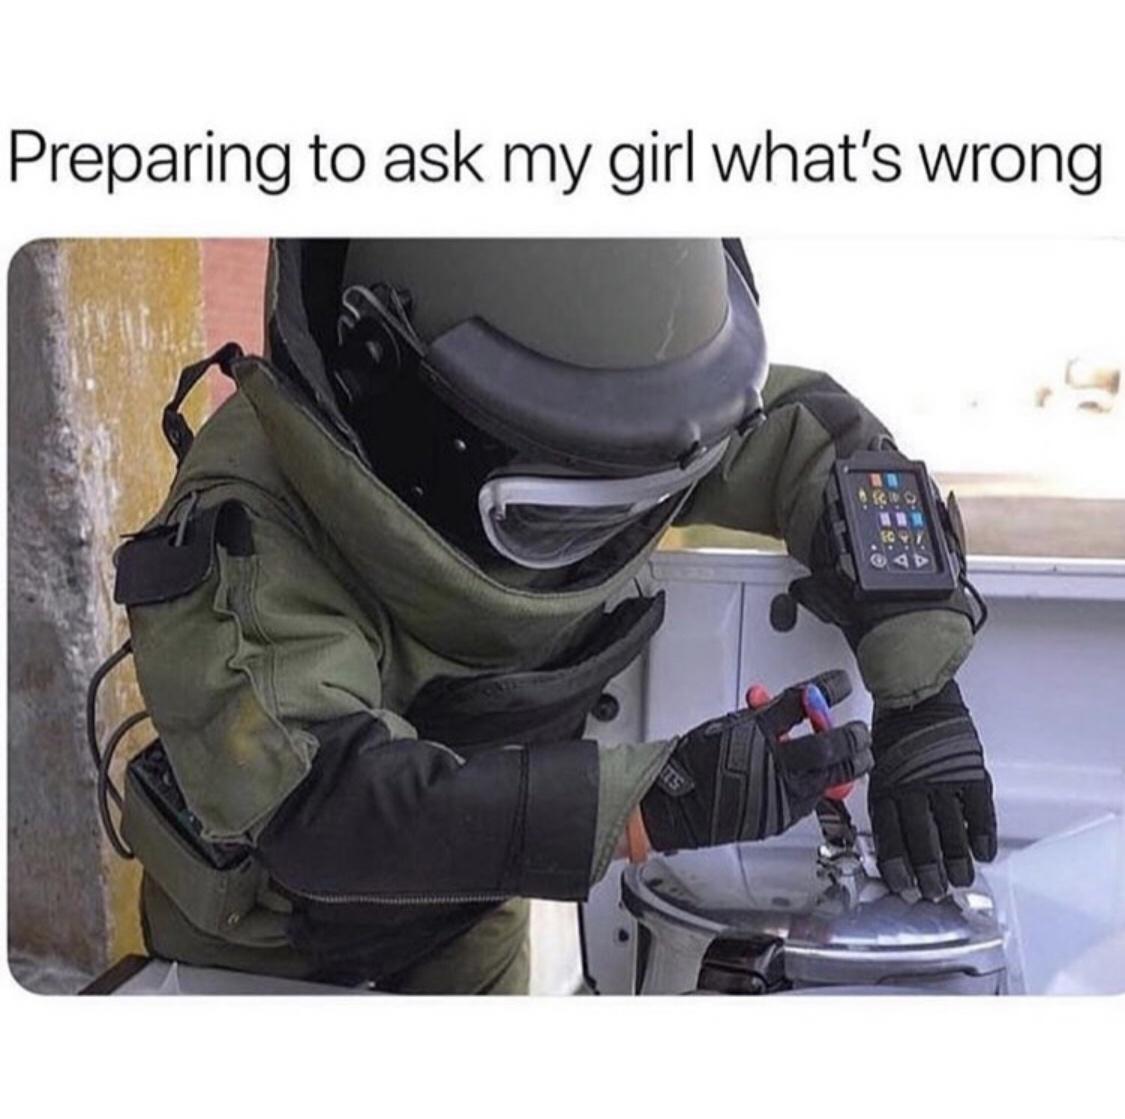 marriage memes - don t cut the red wire meme - Preparing to ask my girl what's wrong Og Un